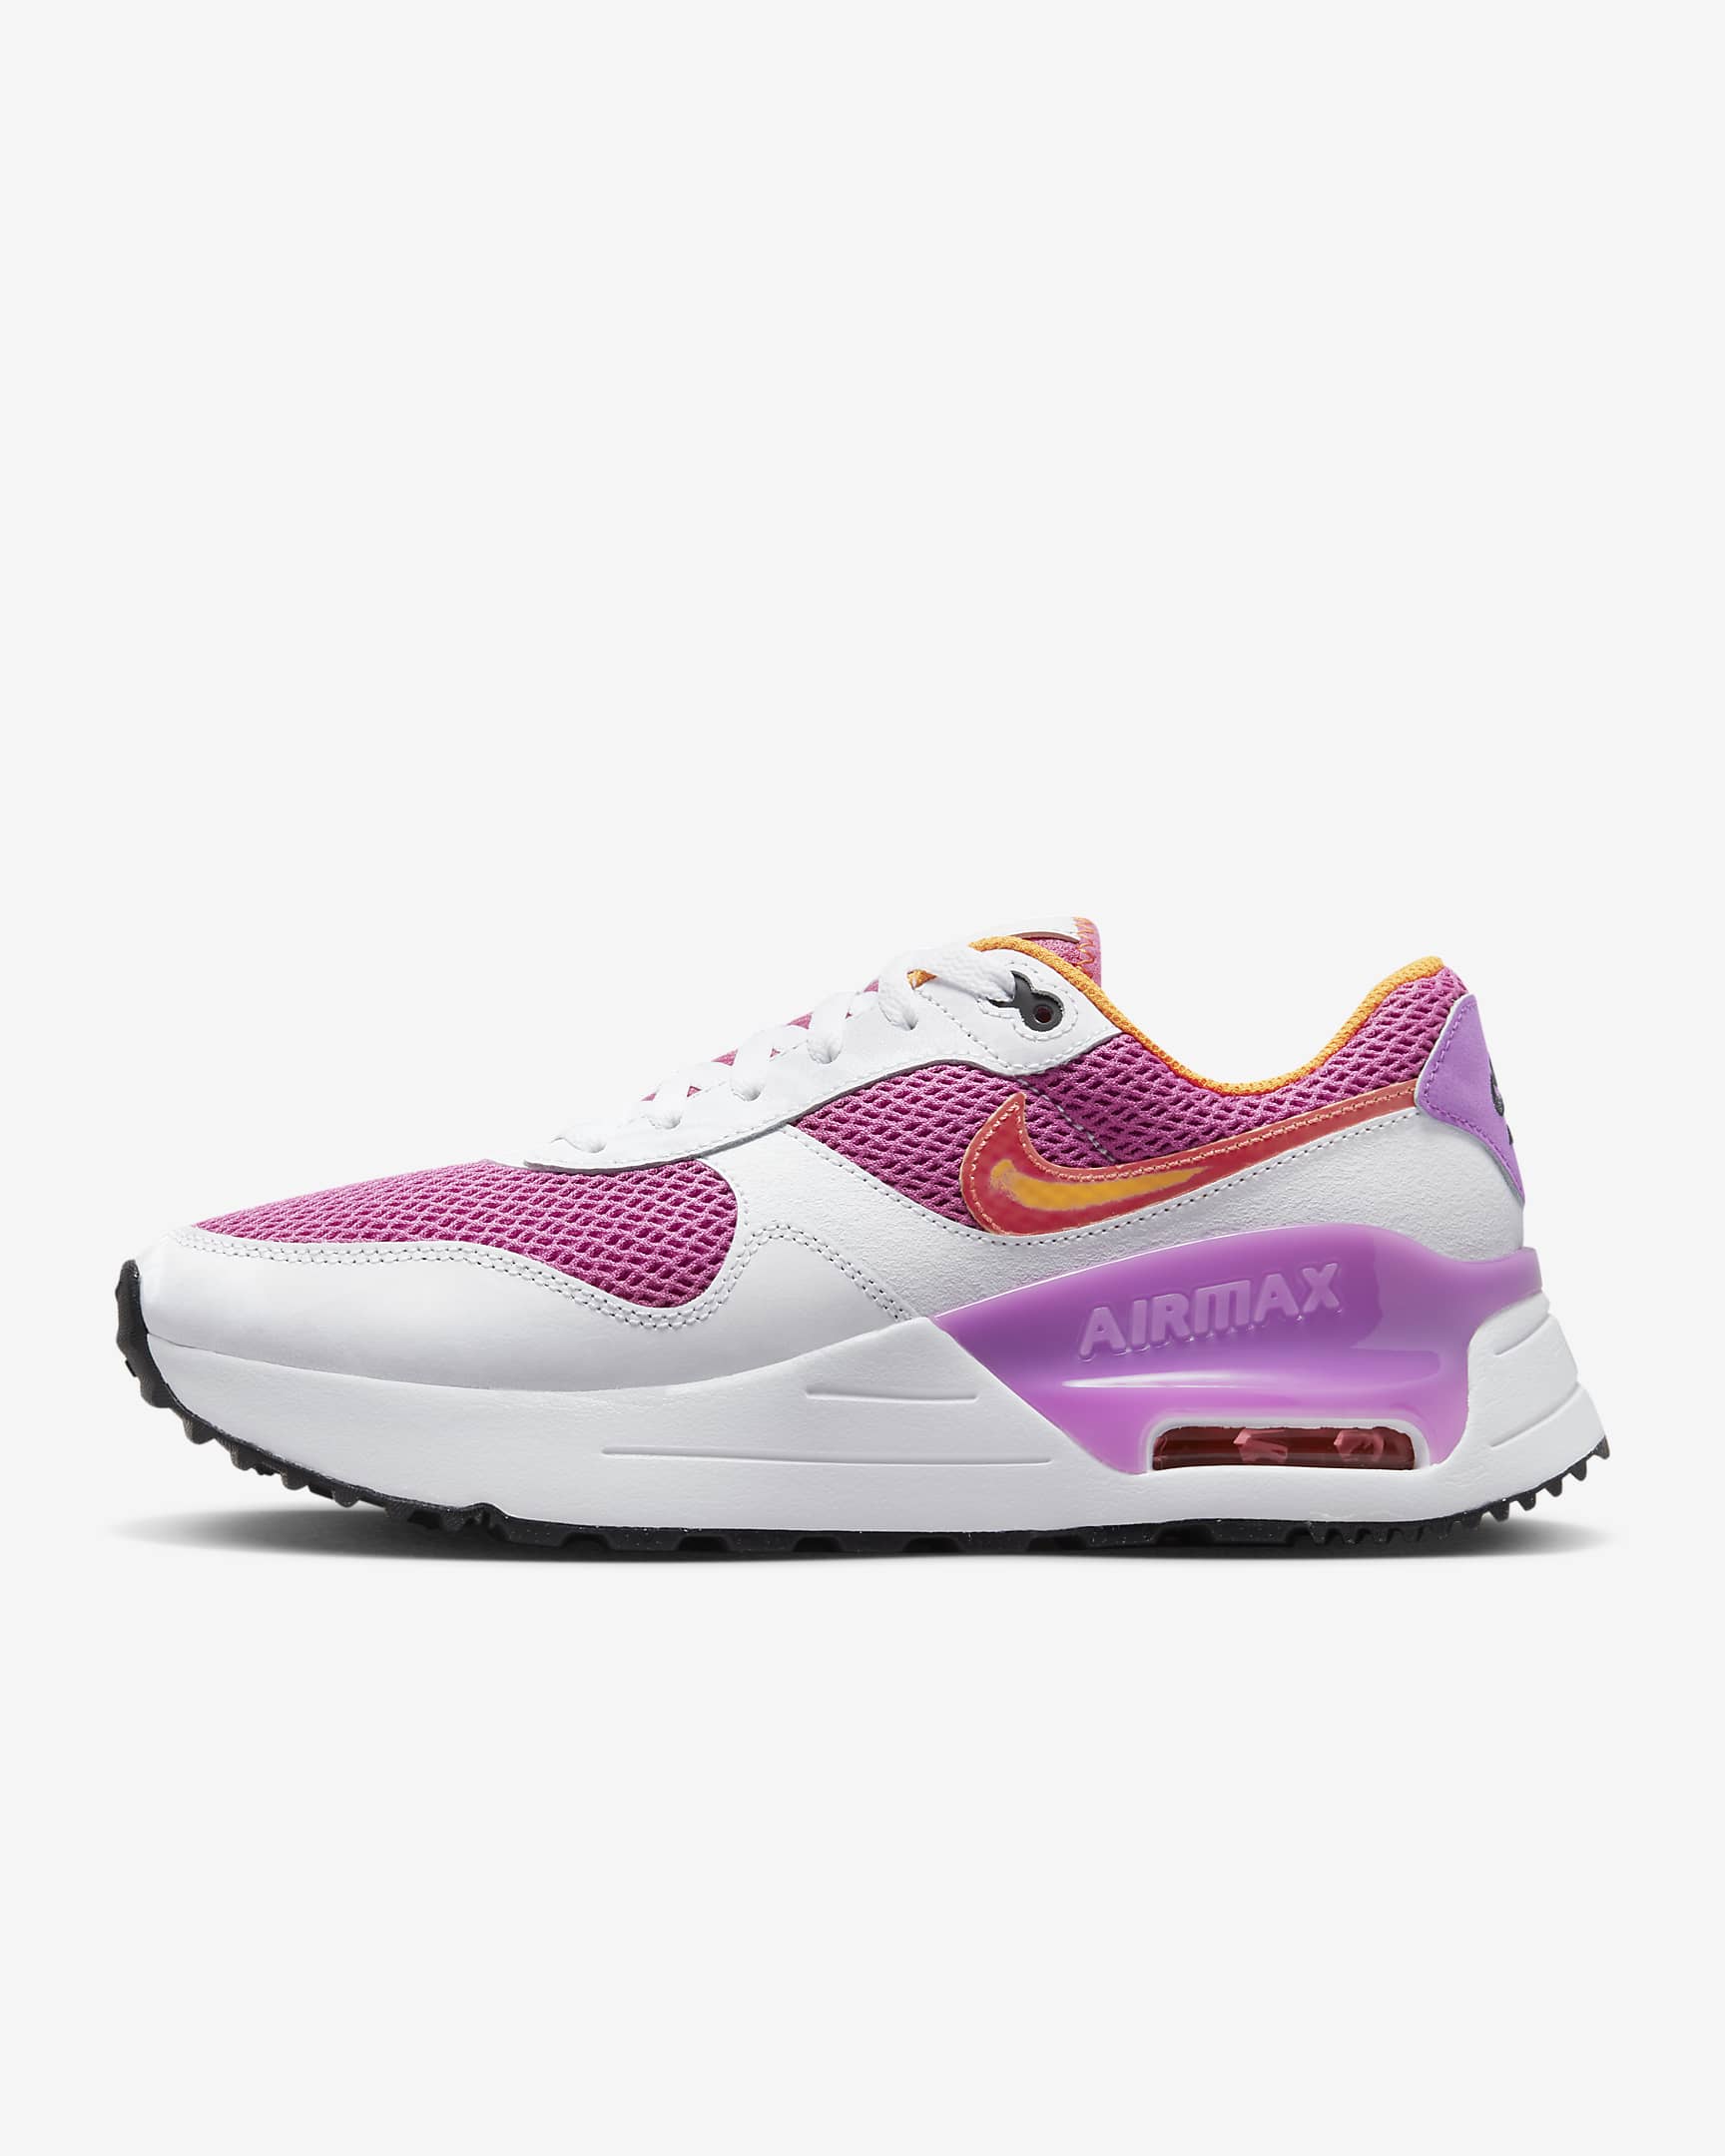 Nike SYSTM Women's Shoes.